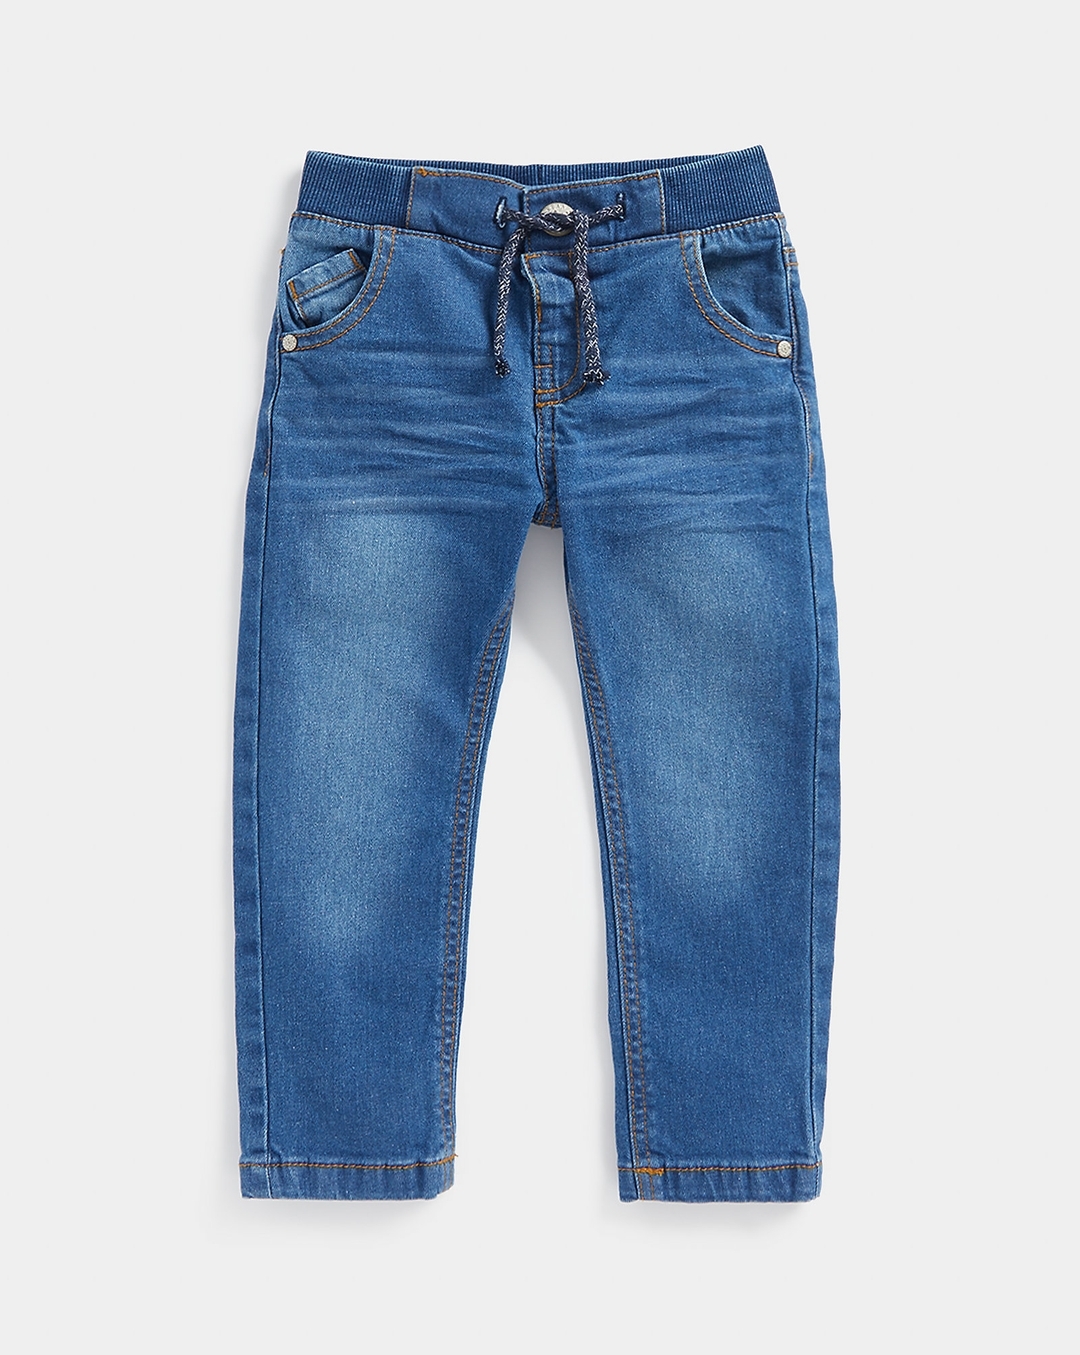 Buy Denim Jeans & Pants for Women by Mothercare Online